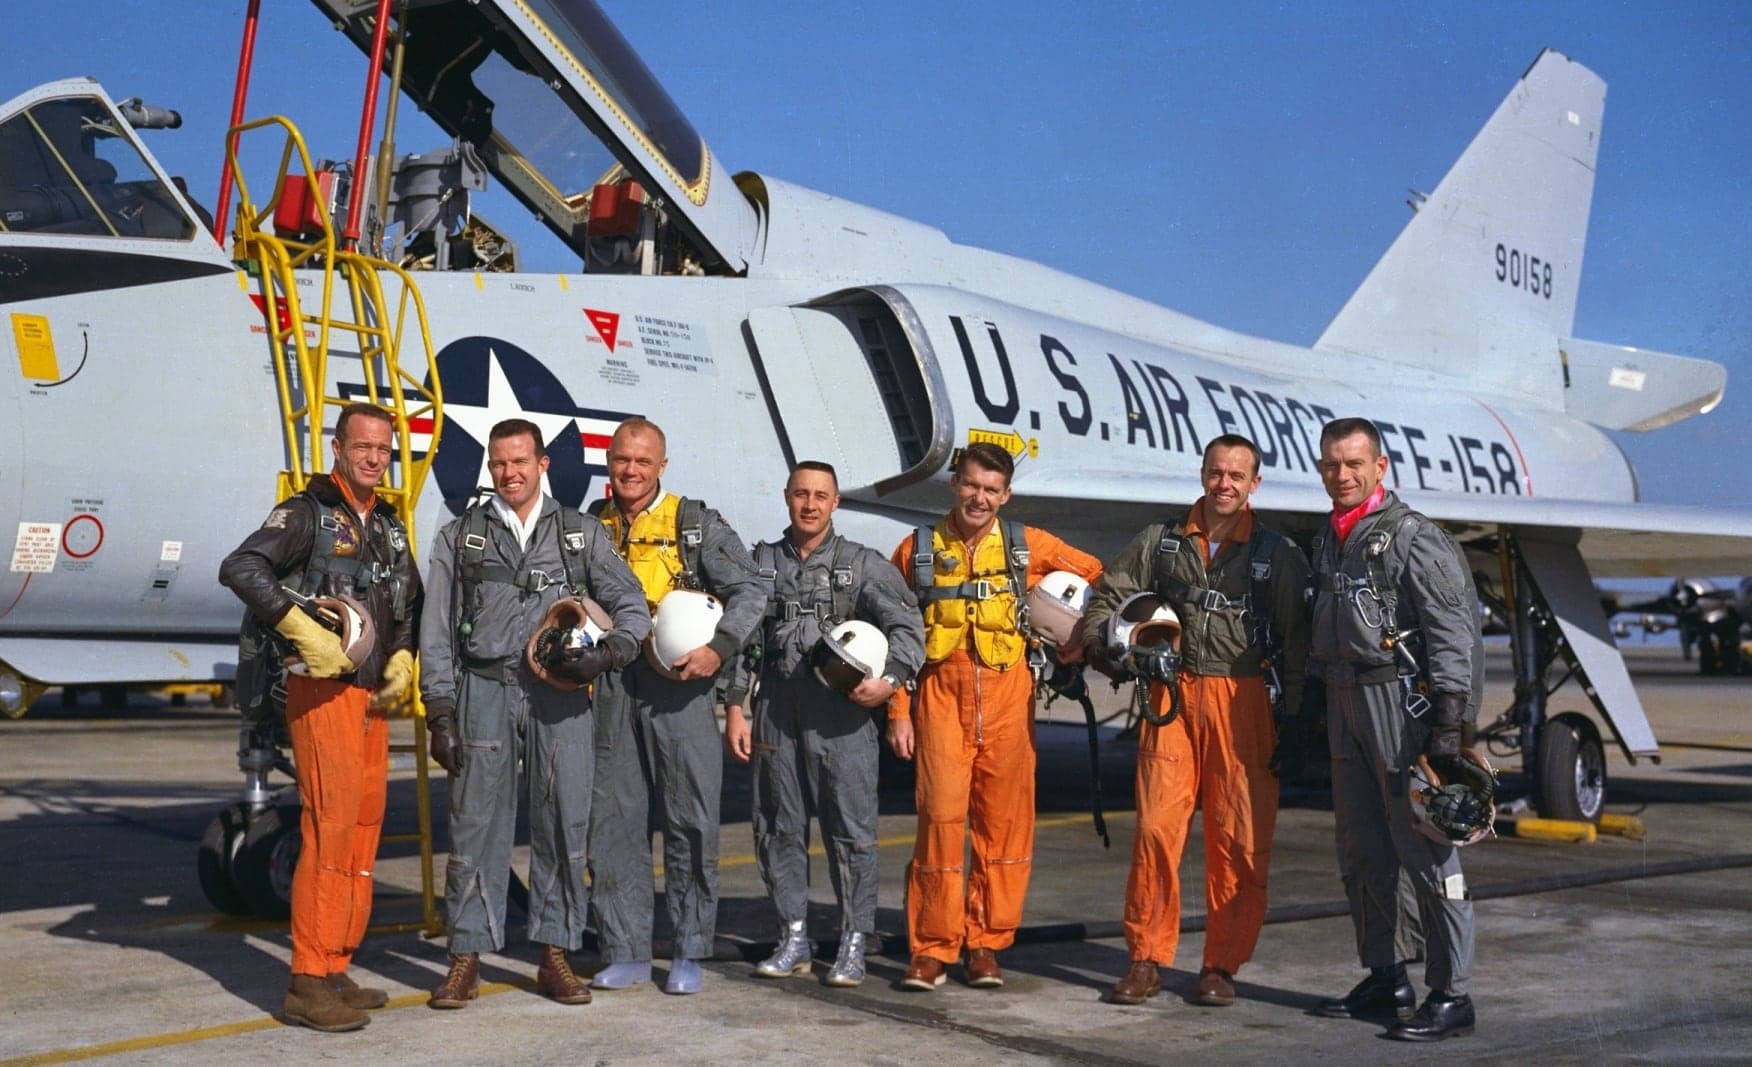 Delta Dart pictured with crew members.